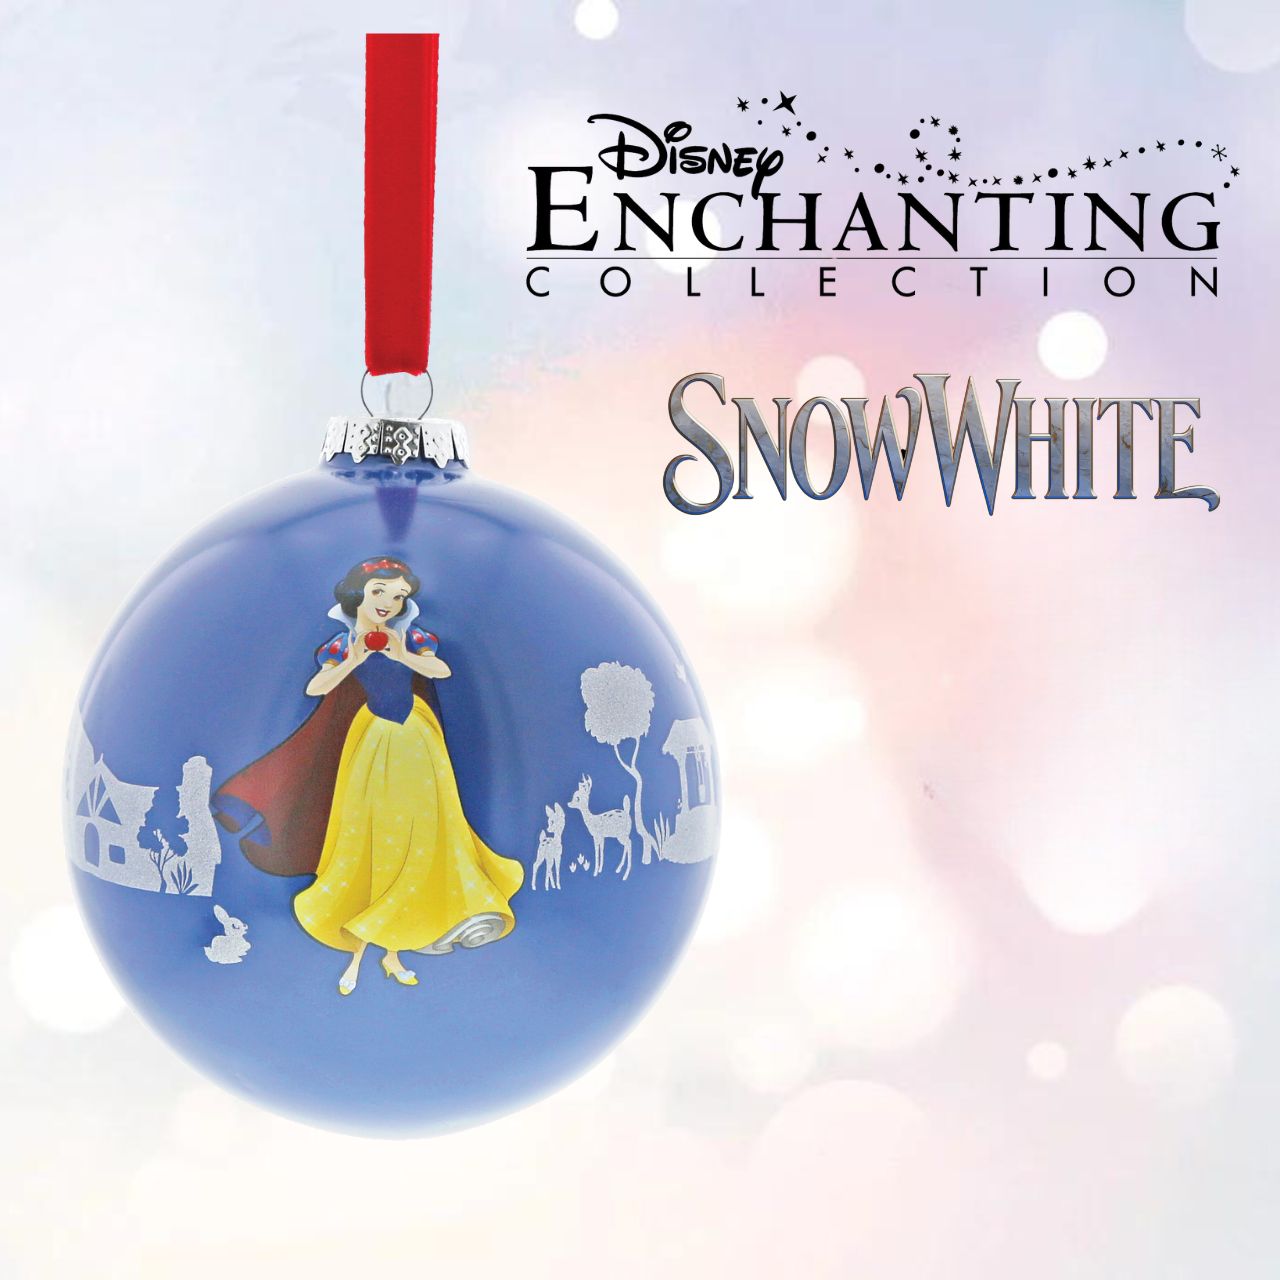 Disney Enchanting Collection Snow White and the Seven Dwarfs The Little Princess  This beautiful glass bauble shows off the kind princess, Snow White against a fairy-tale woodland silhouette. This treasured keepsake would make a lovely unique gift for a friend, or a self-purchase to brighten up the home. Presented in a branded window box.